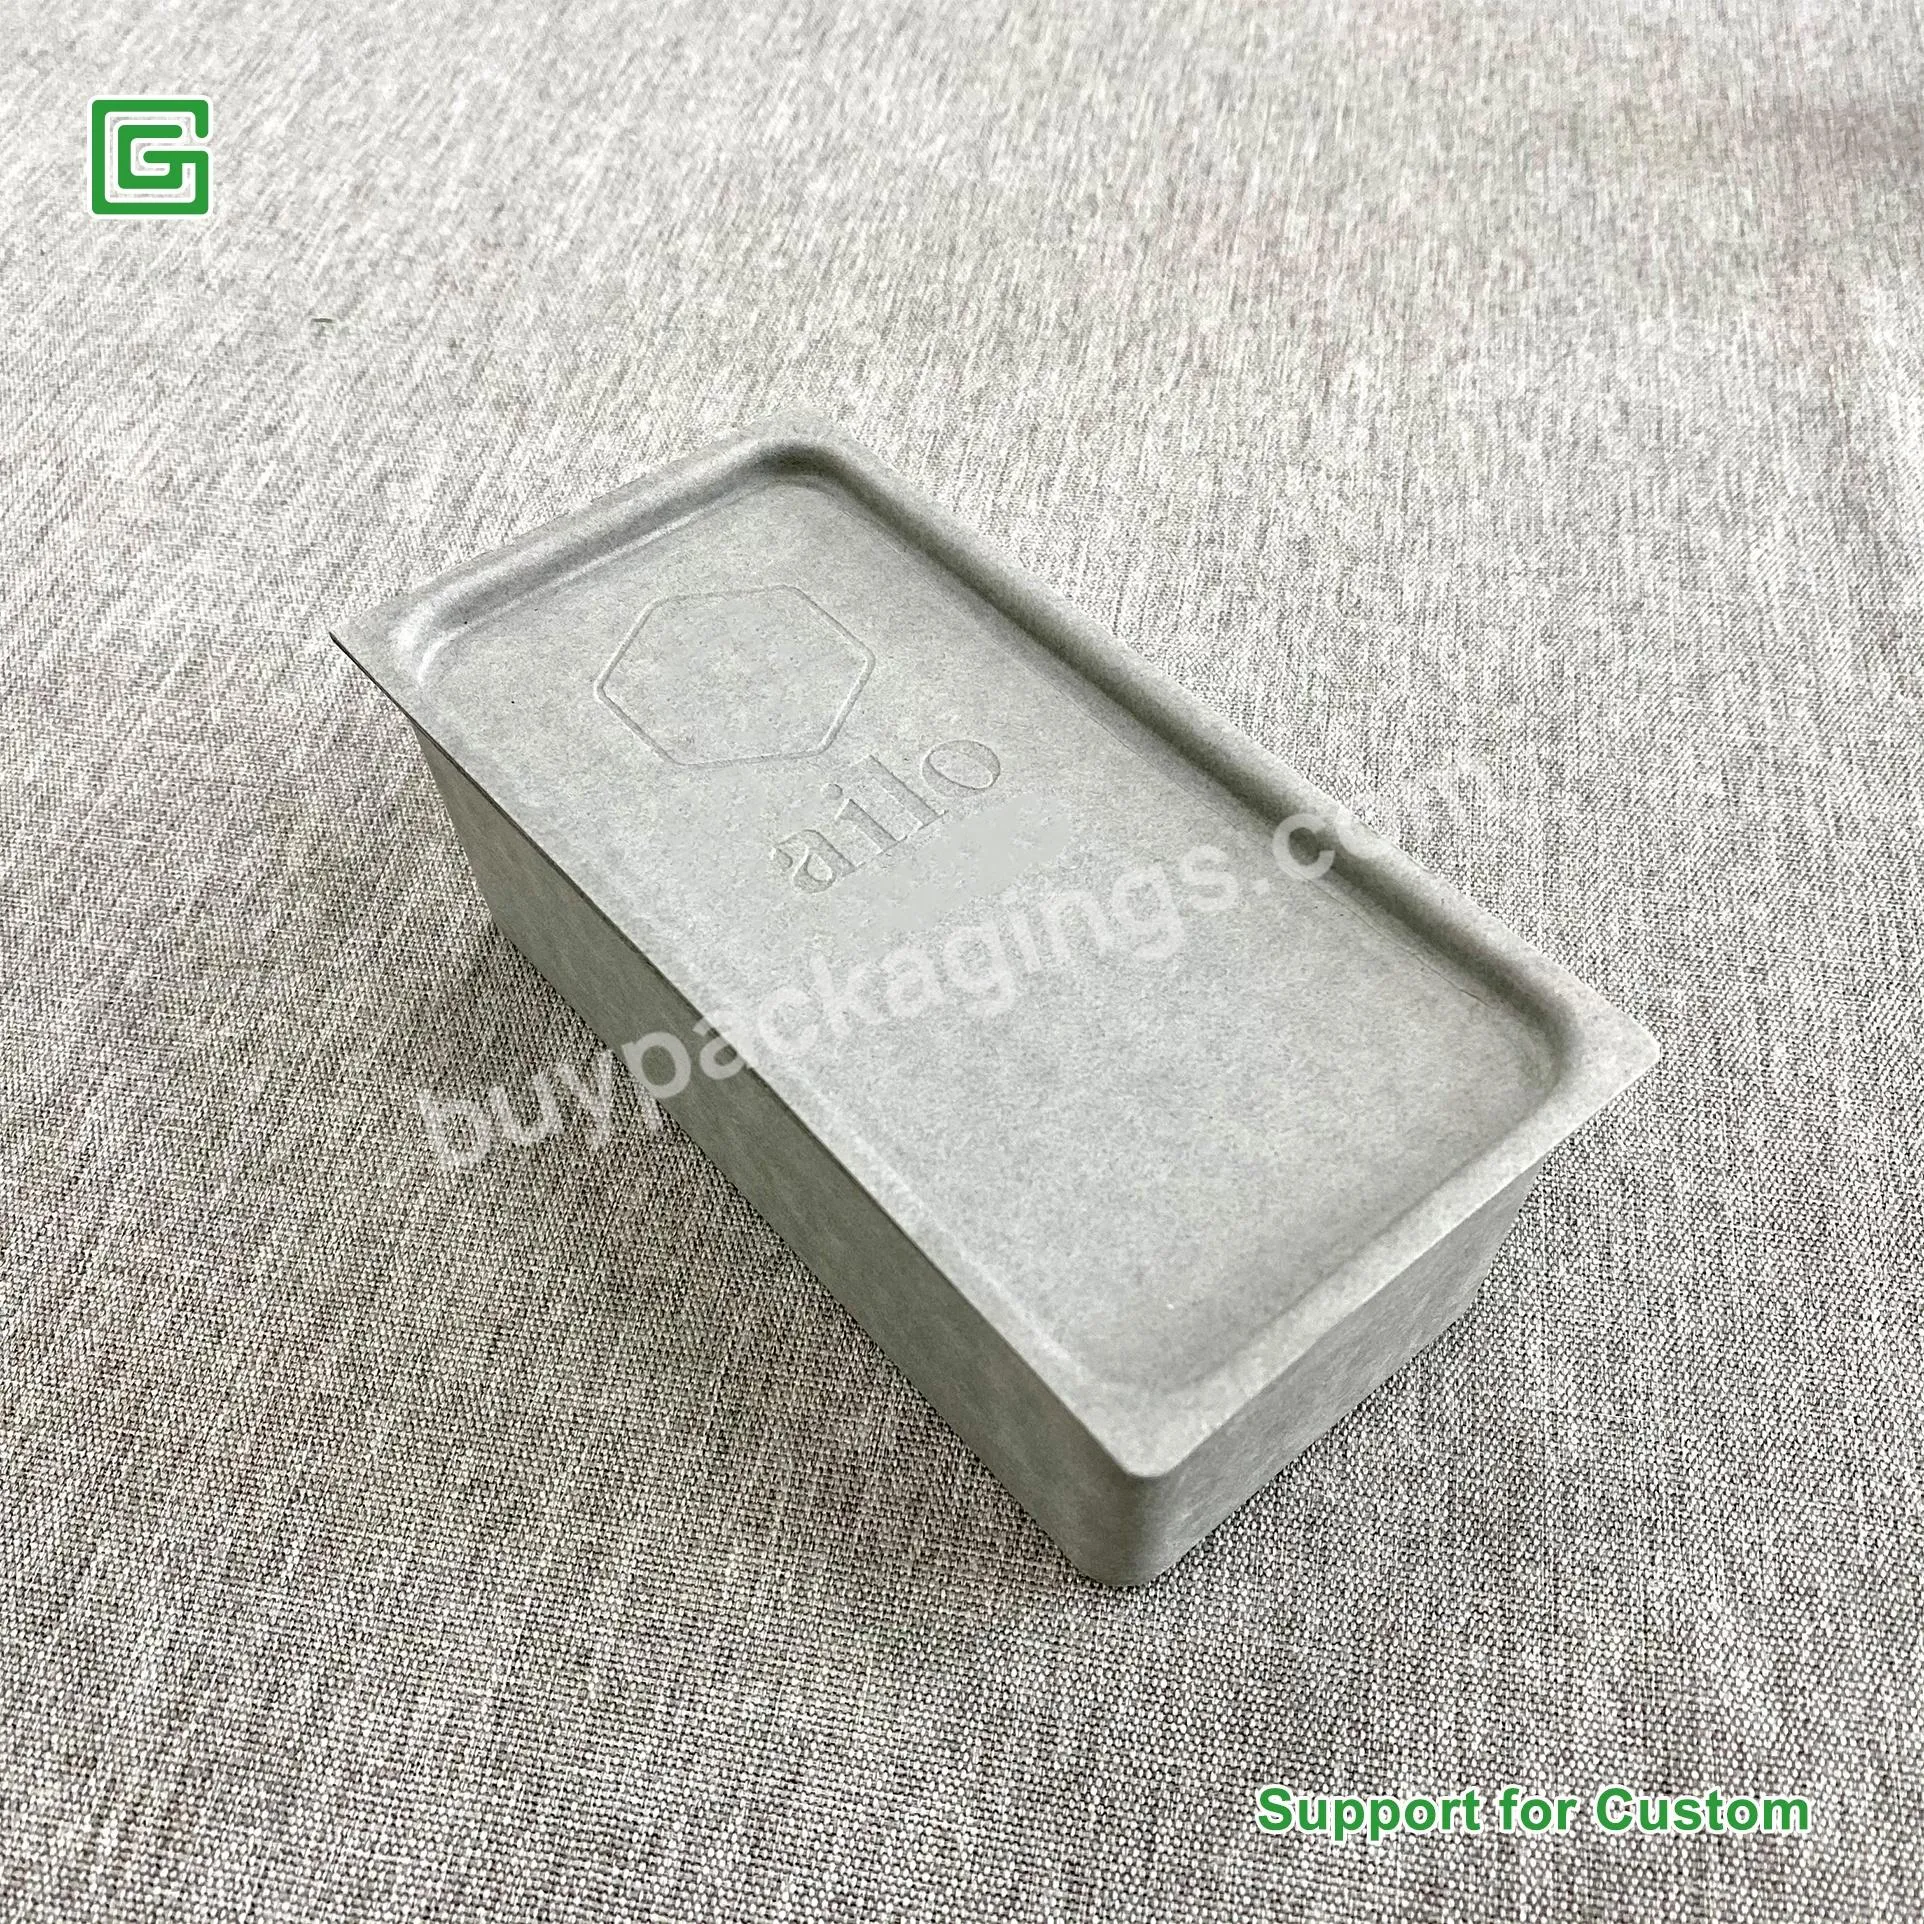 Custom Color Degradable Luxury Lotion Skin Care Sugarcane Printed Paper Boxes Packaging - Buy Paper Gift Packaging Box,Colored Packaging Box,Mold Tray And Lid.